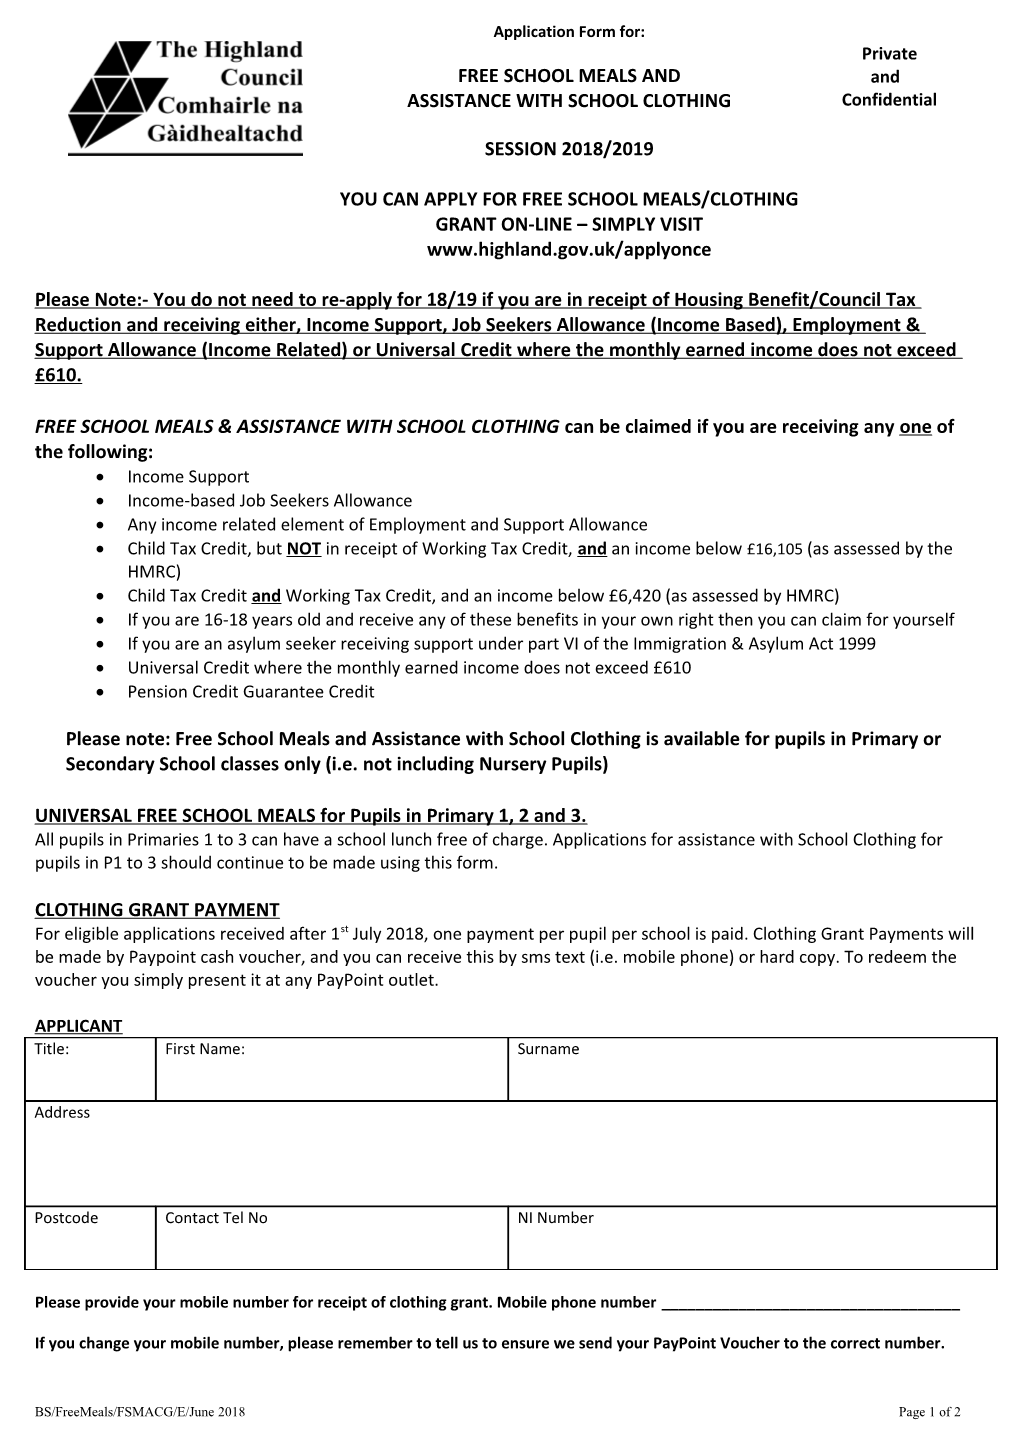 Free School Meals & Clothing Grant Application - English